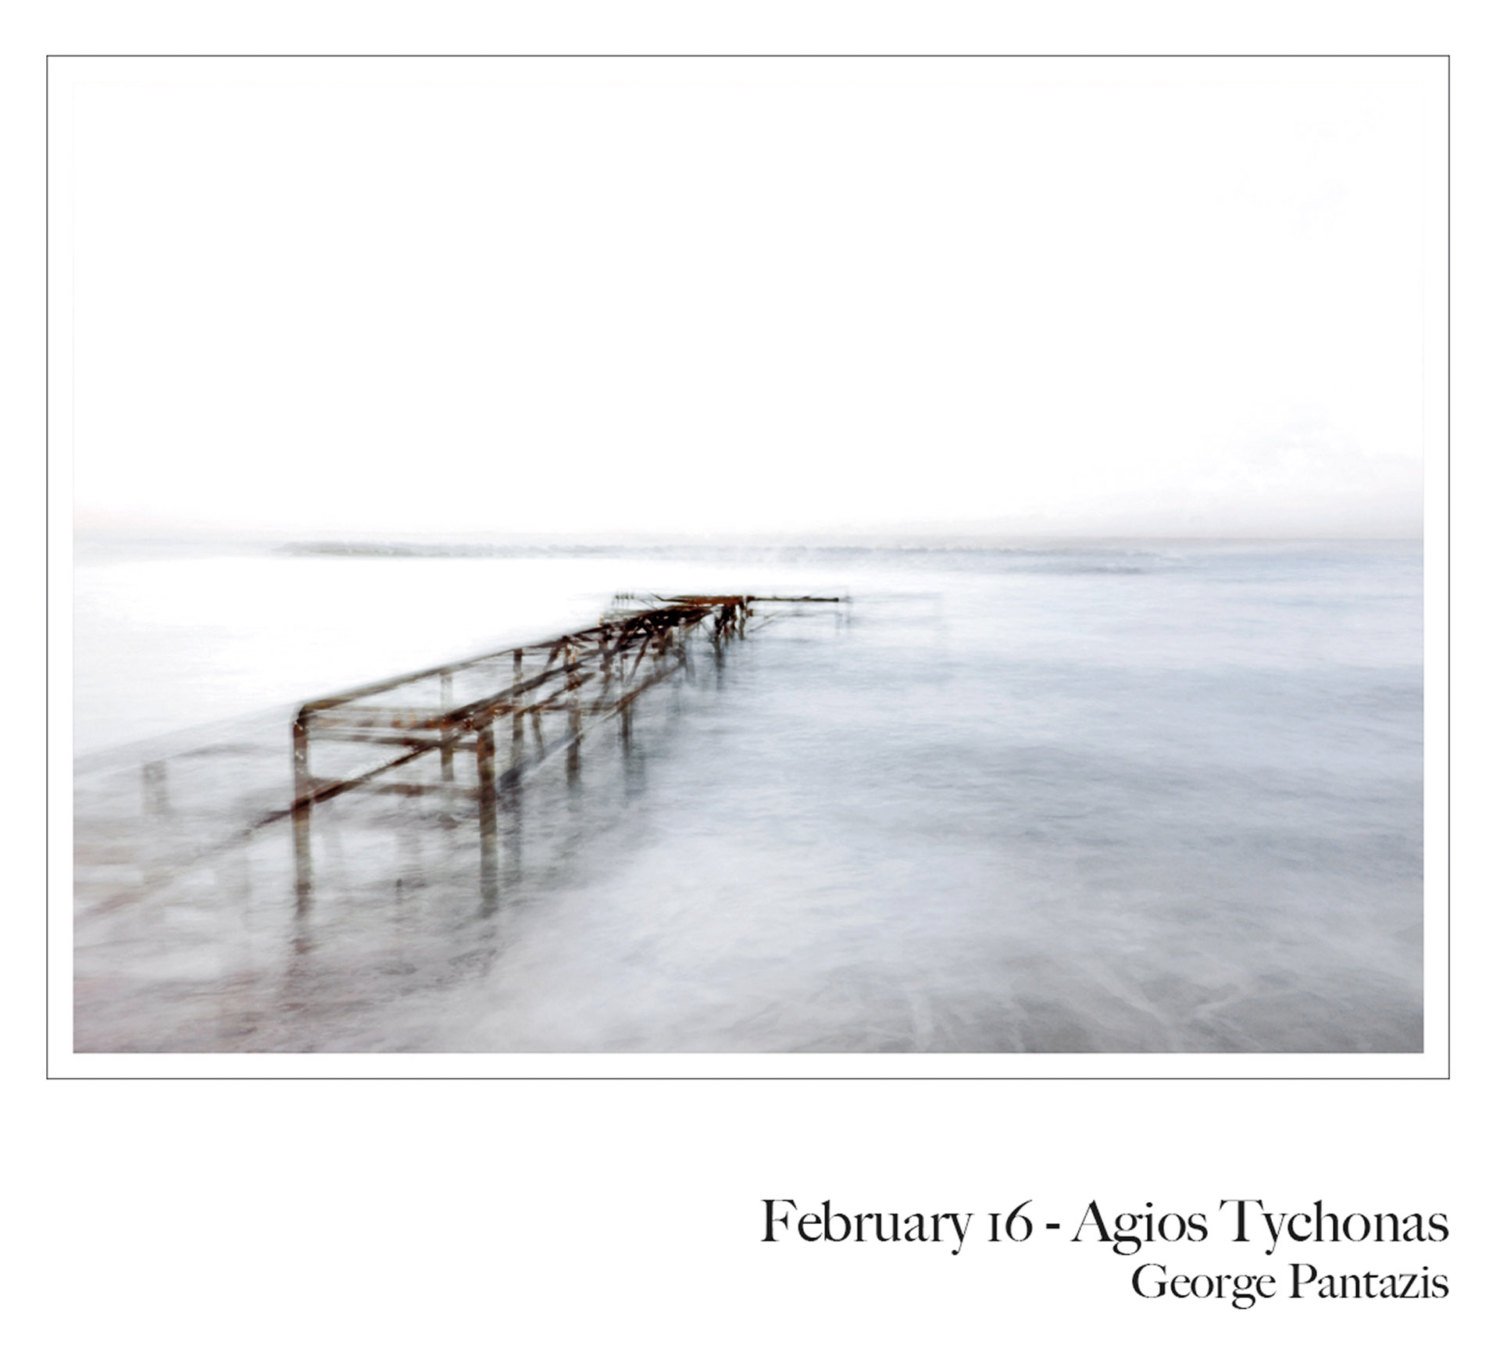 February 16 - Agios Tychonas by George Pantazis (color photography, seascape, pier, long exposure, zoom, Cyprus, Limassol, rusted iron, sea)